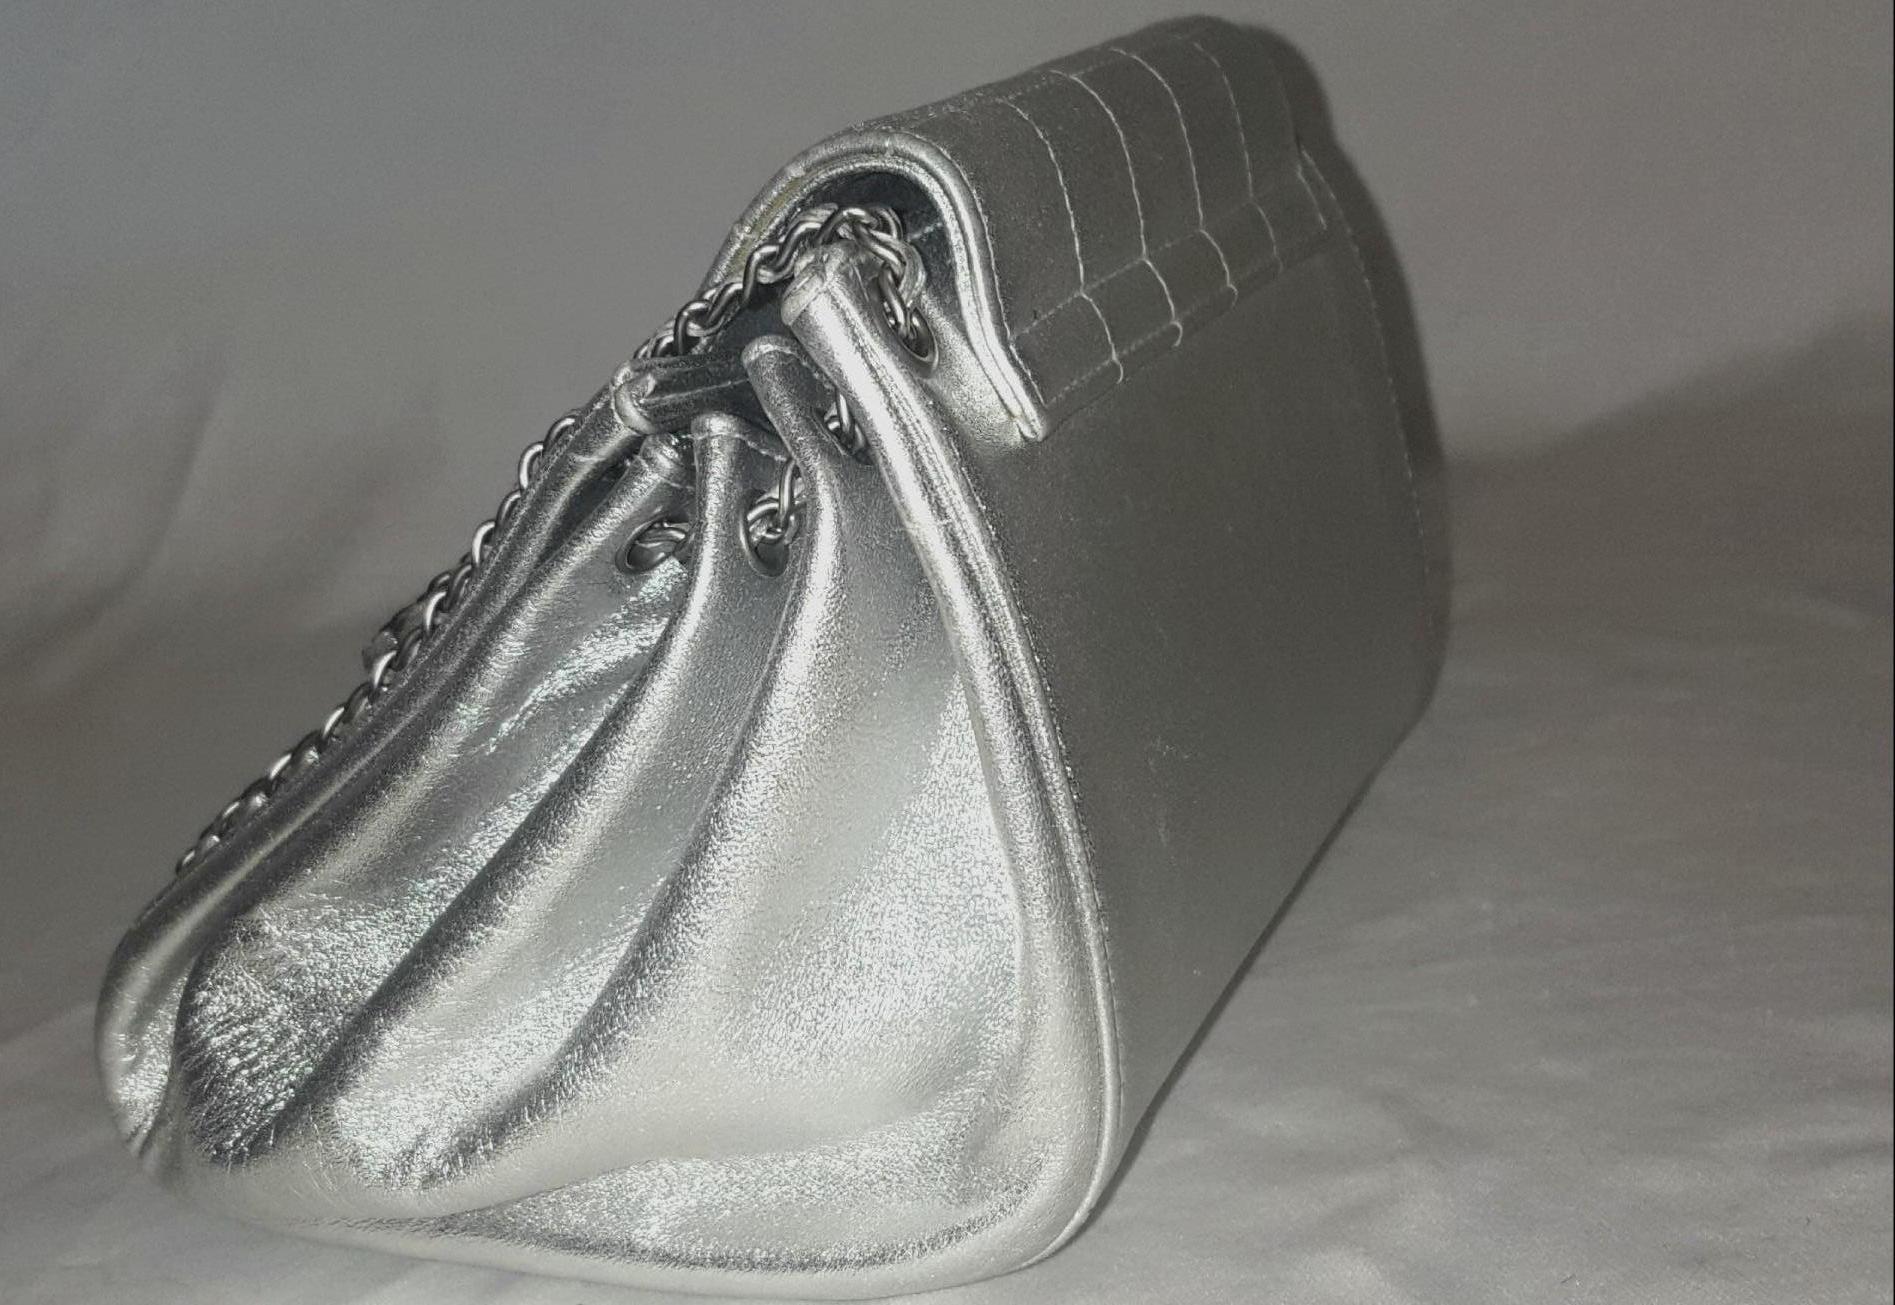 Chanel vintage Mademoiselle silver metallic square quilt accordion mini bag is as stylish today as the day it was launched.  This shoulder bag is crafted of silver metallic lambskin leather with square quilting on the flap that has a turn lock on